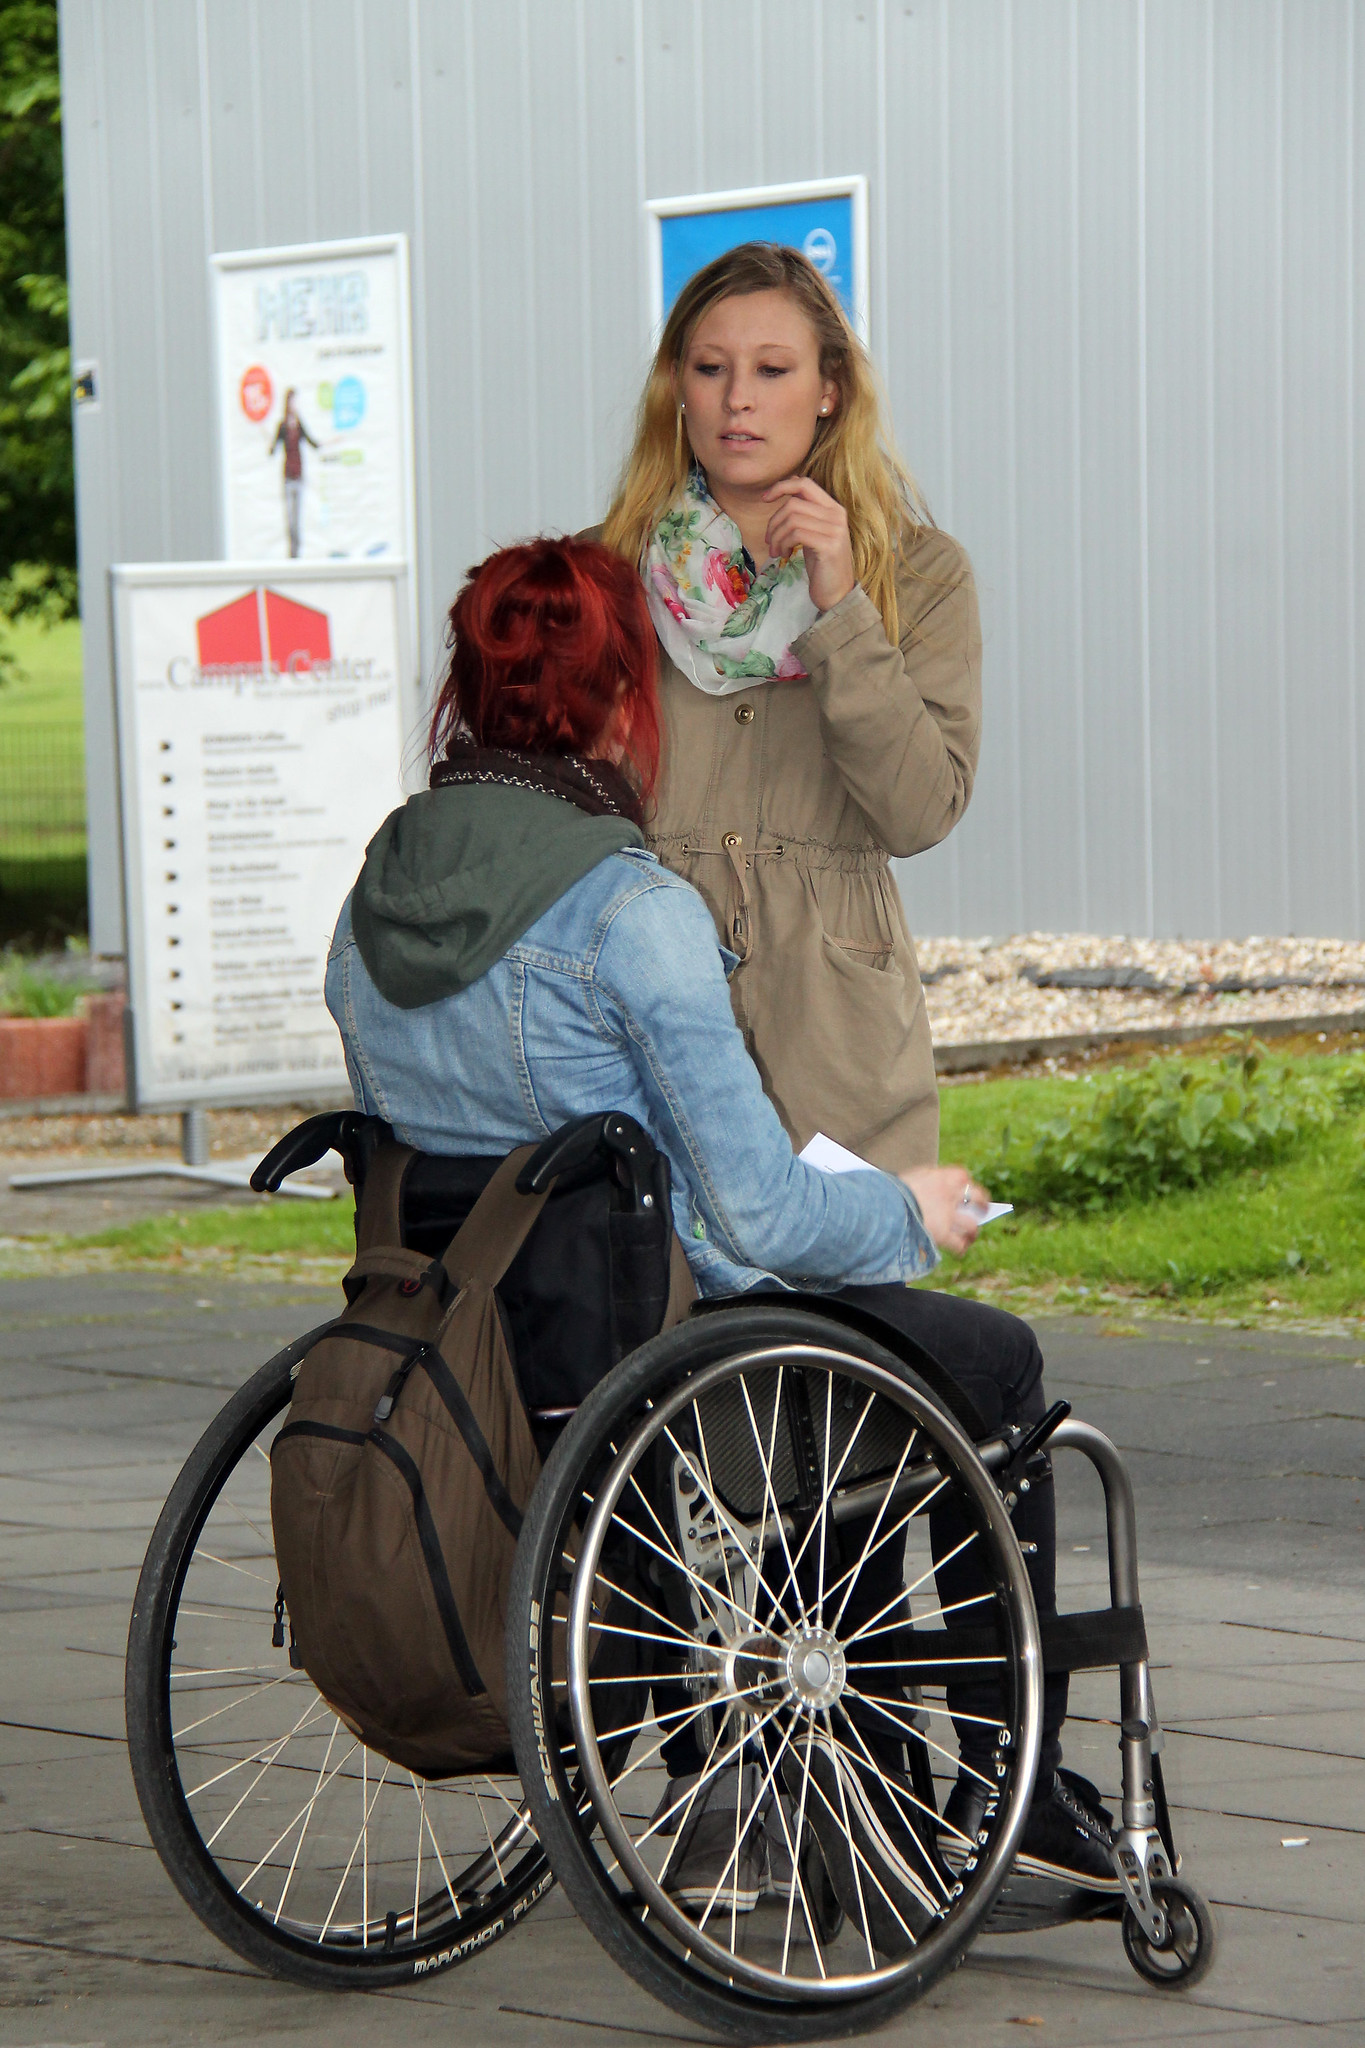 Participate image presenting two women talking to each other, one of which is sitting on a wheelchair.